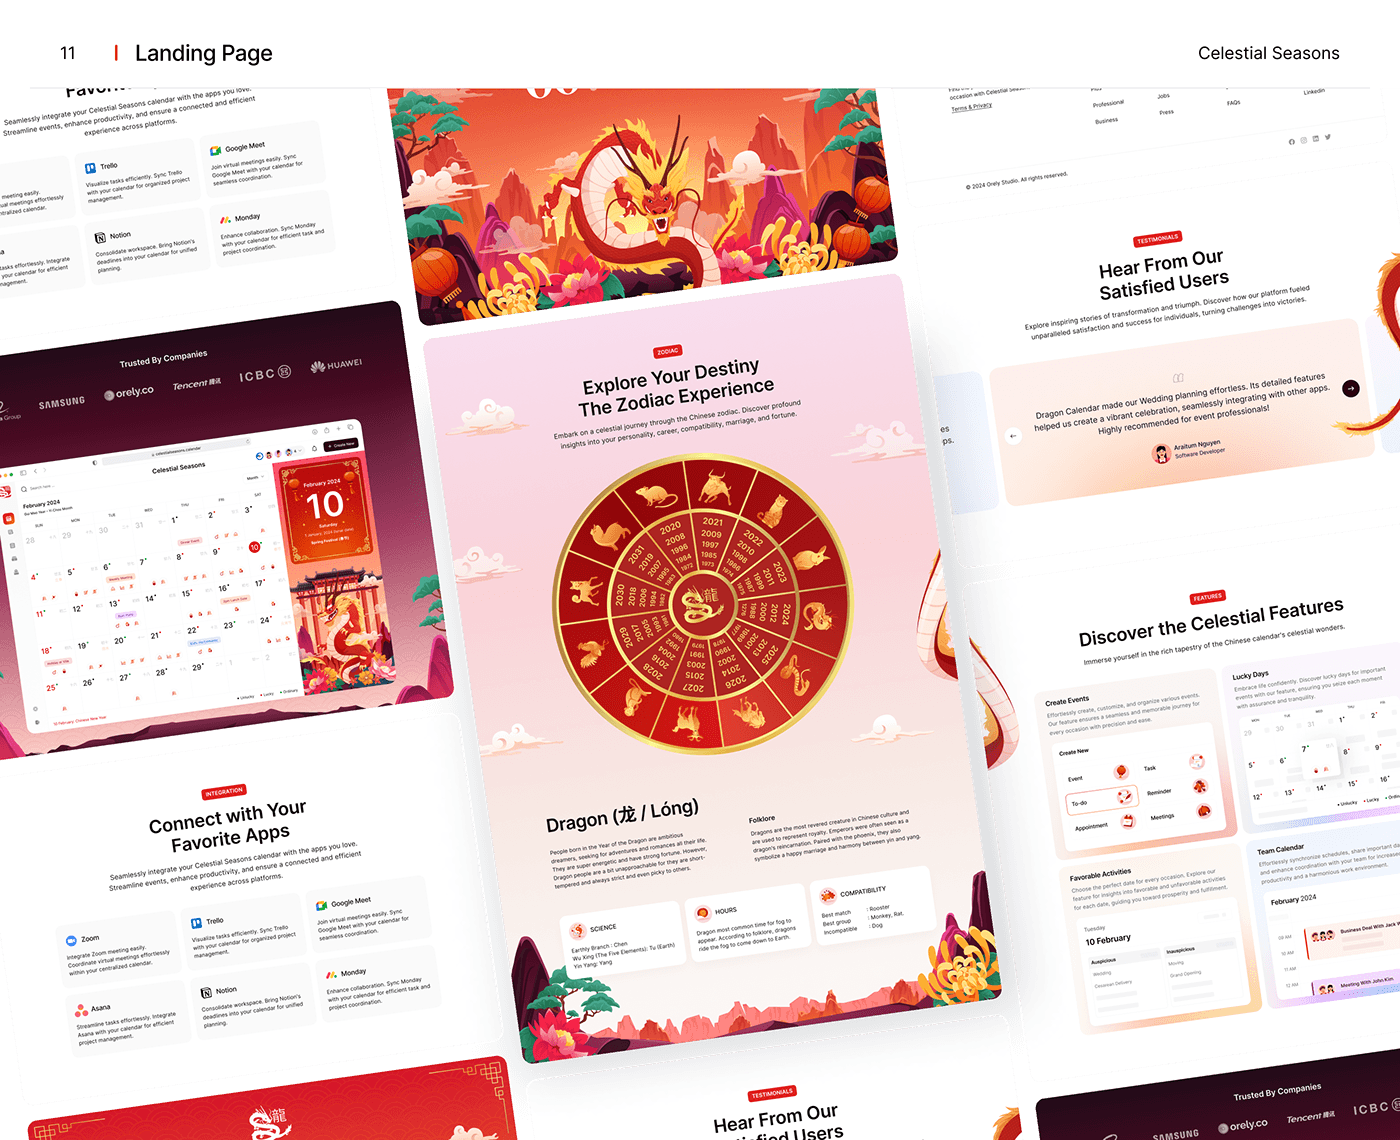 compilation of celestial seasons landing page sections.